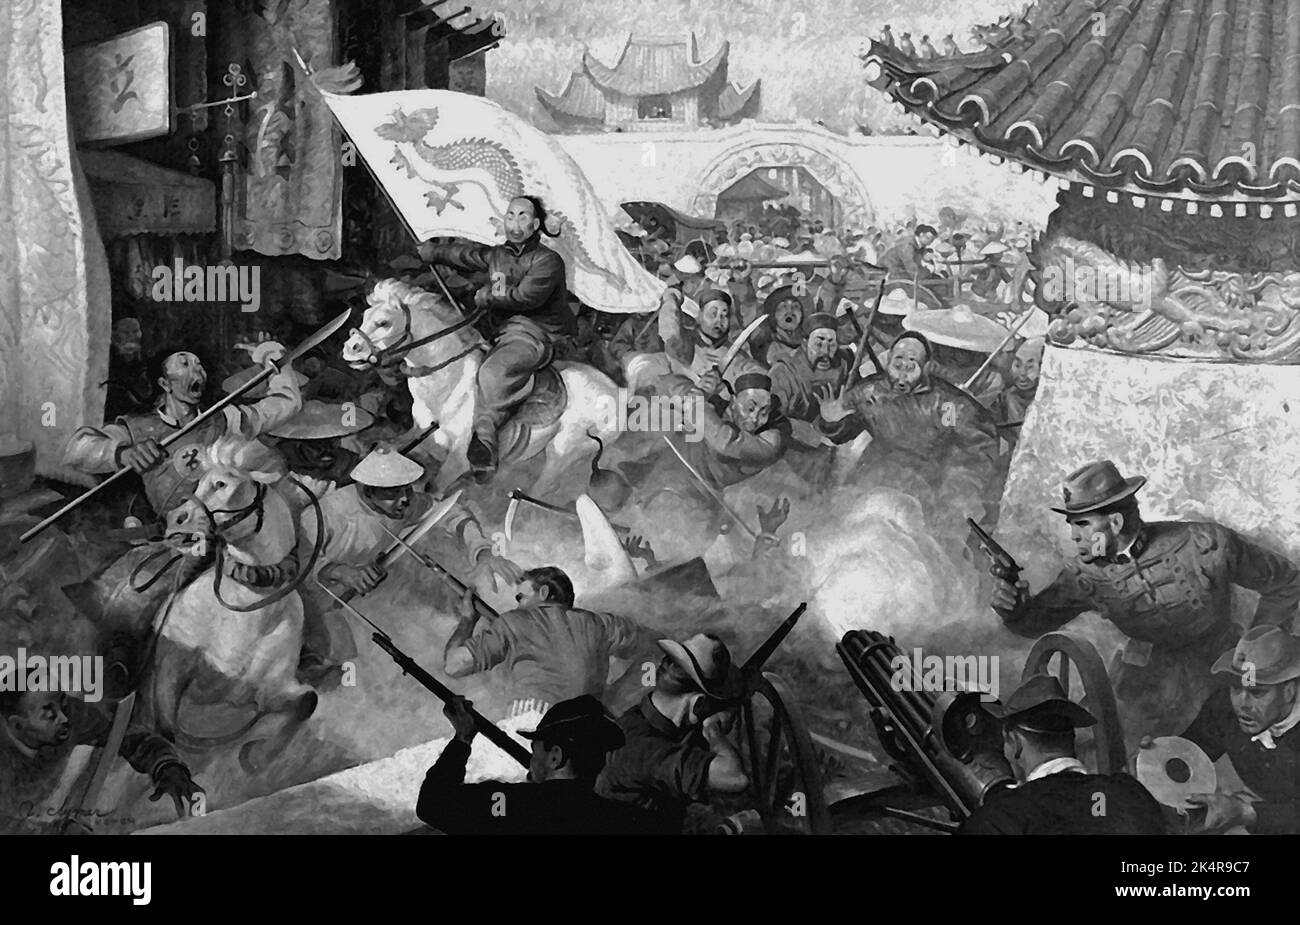 PEKING, CHINA - 1900 - Artwork depicting the US Marines fighting the rebellious Boxers outside Peking Legation, 1900. Painting by John Clymer - Stock Photo